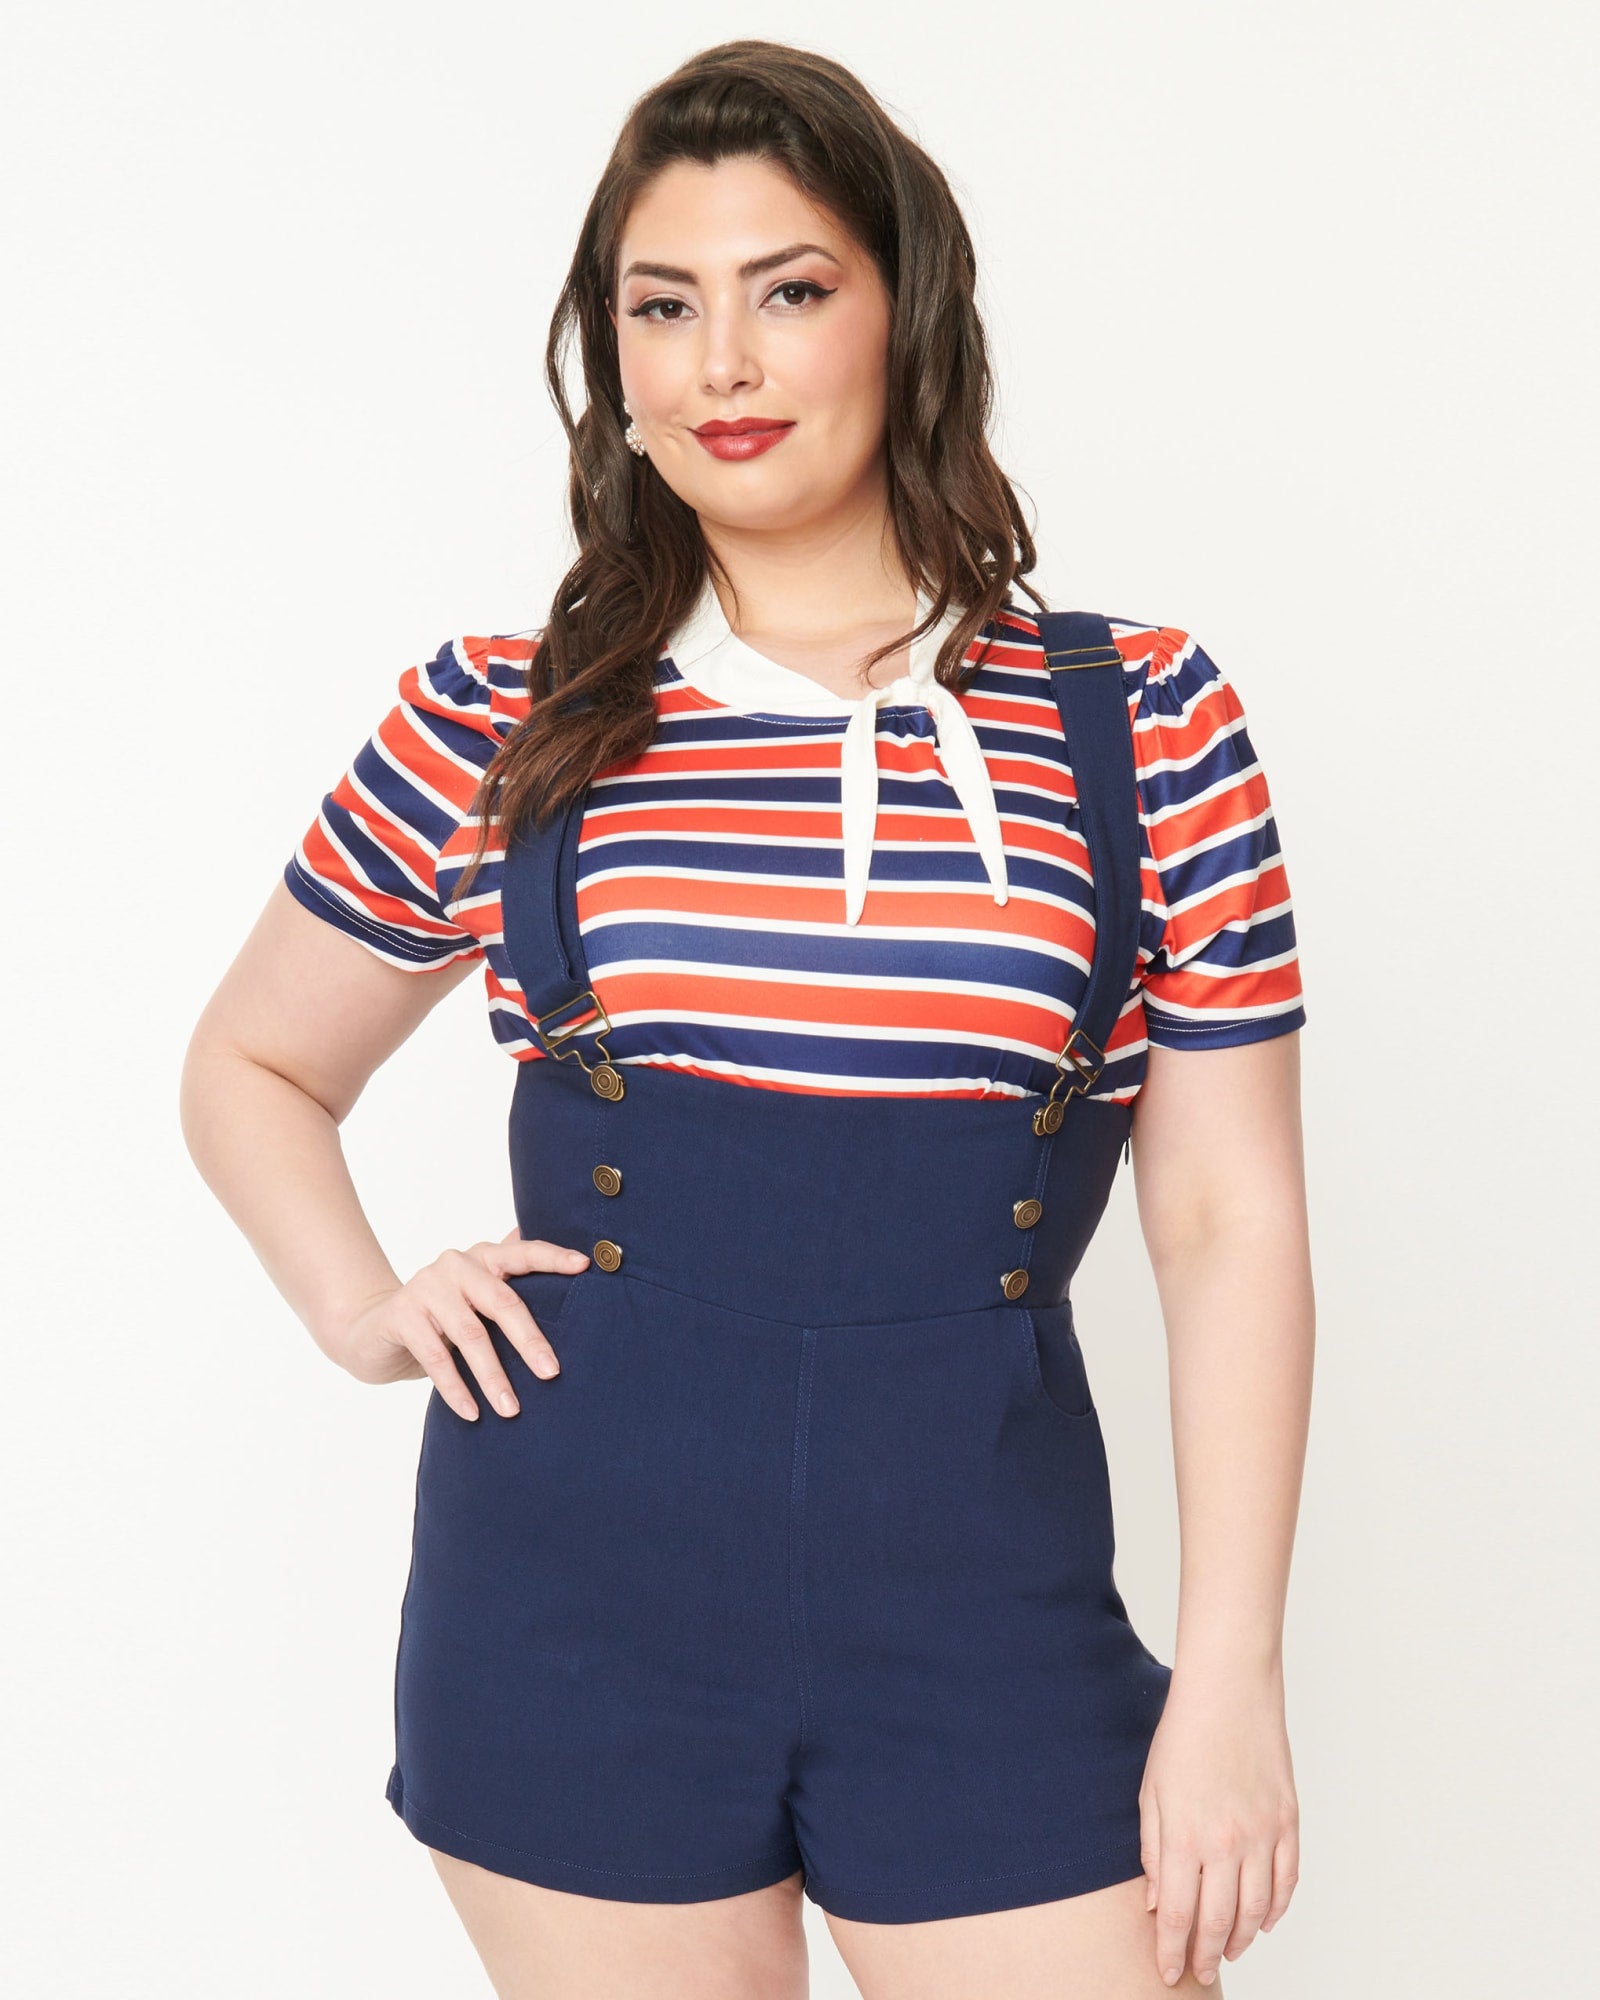 Unique Vintage Navy & Red Striped Bow Sweetie Knit Top | Navy & Red Striped